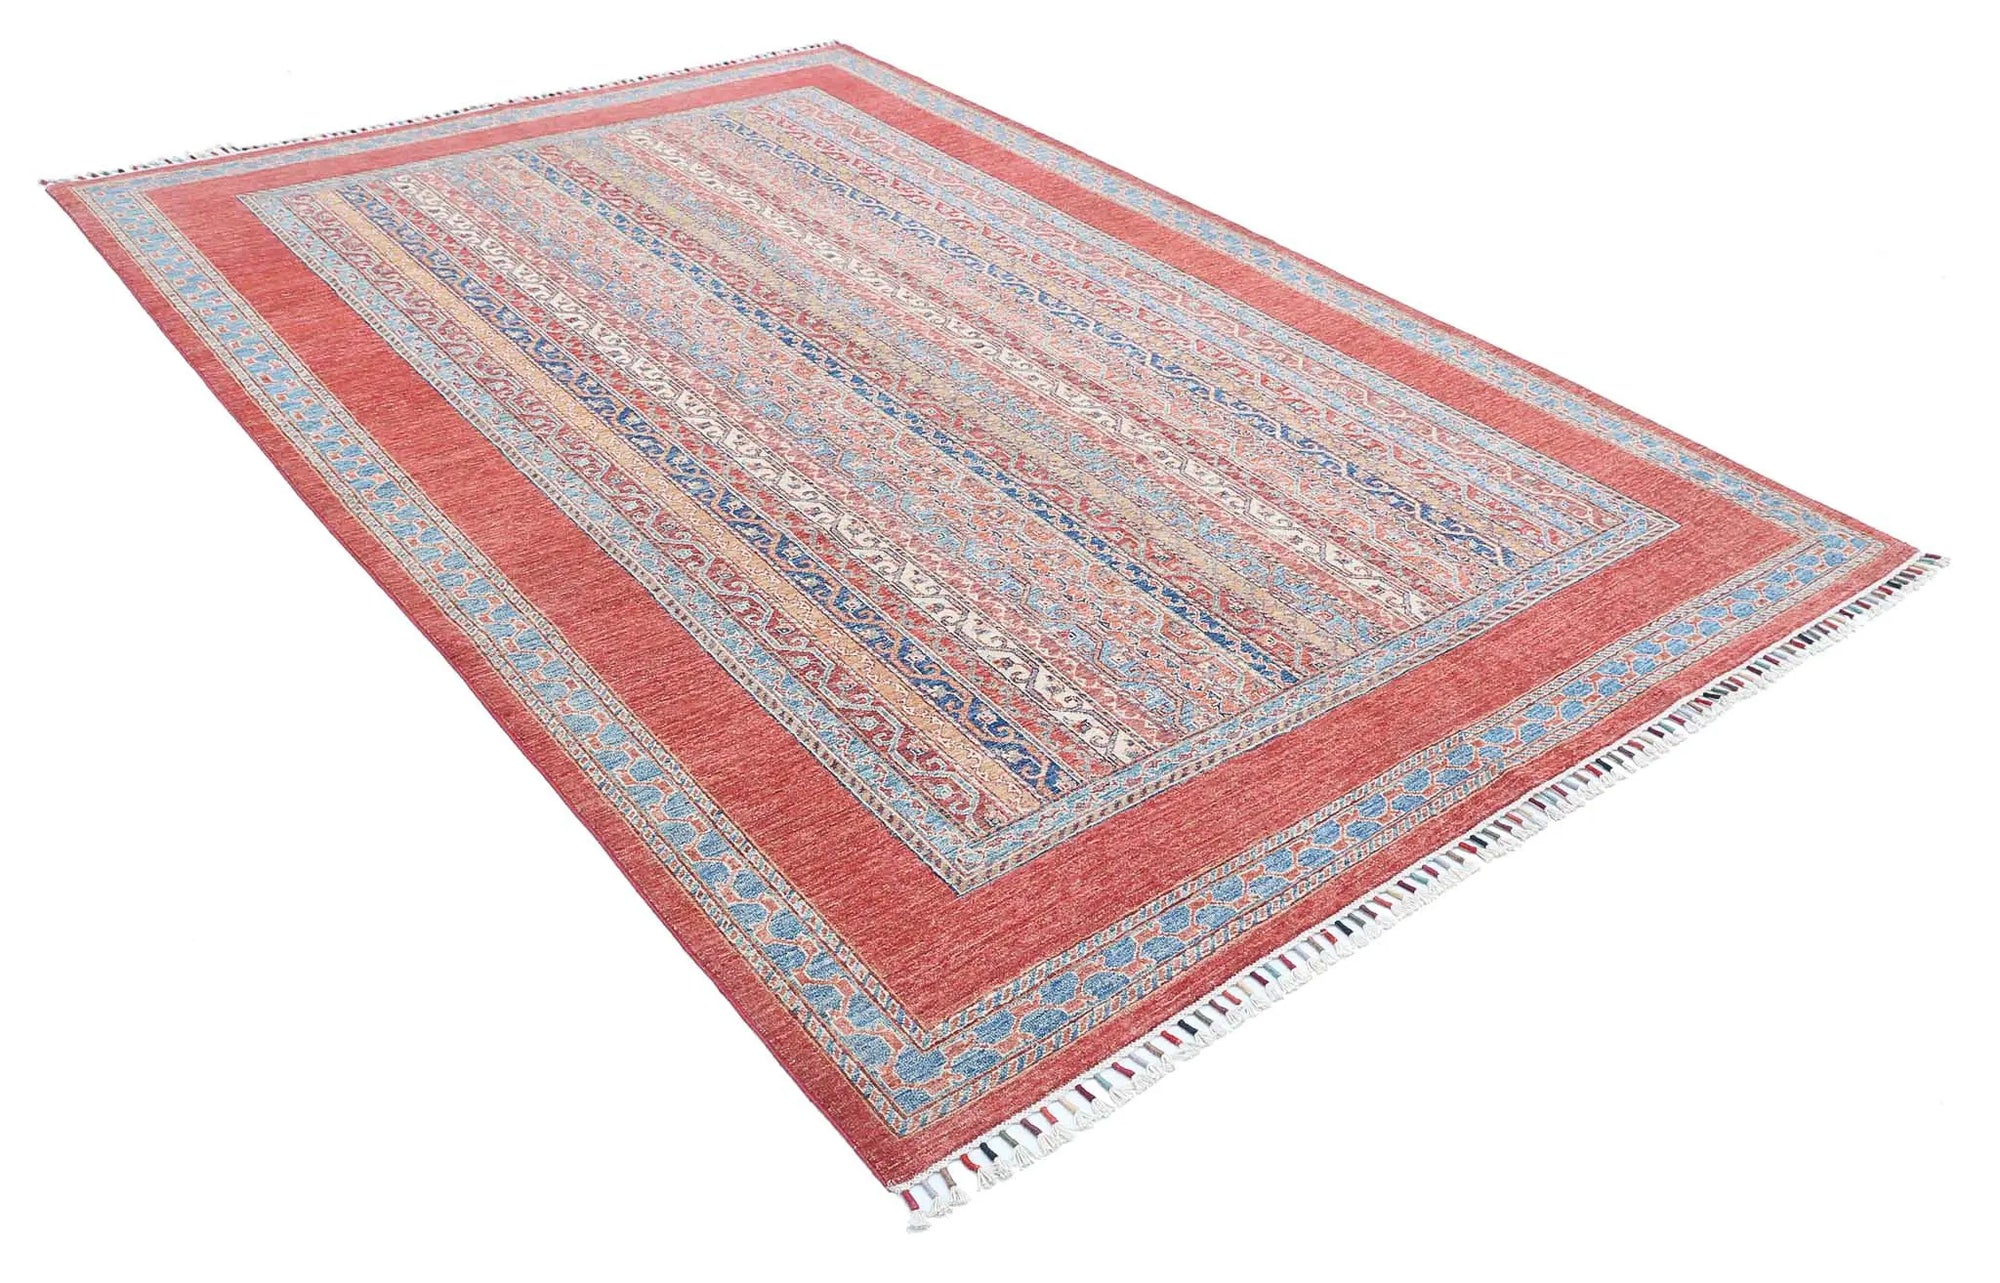 Hand Knotted Shaal Wool Rug - 6'8'' x 9'8''